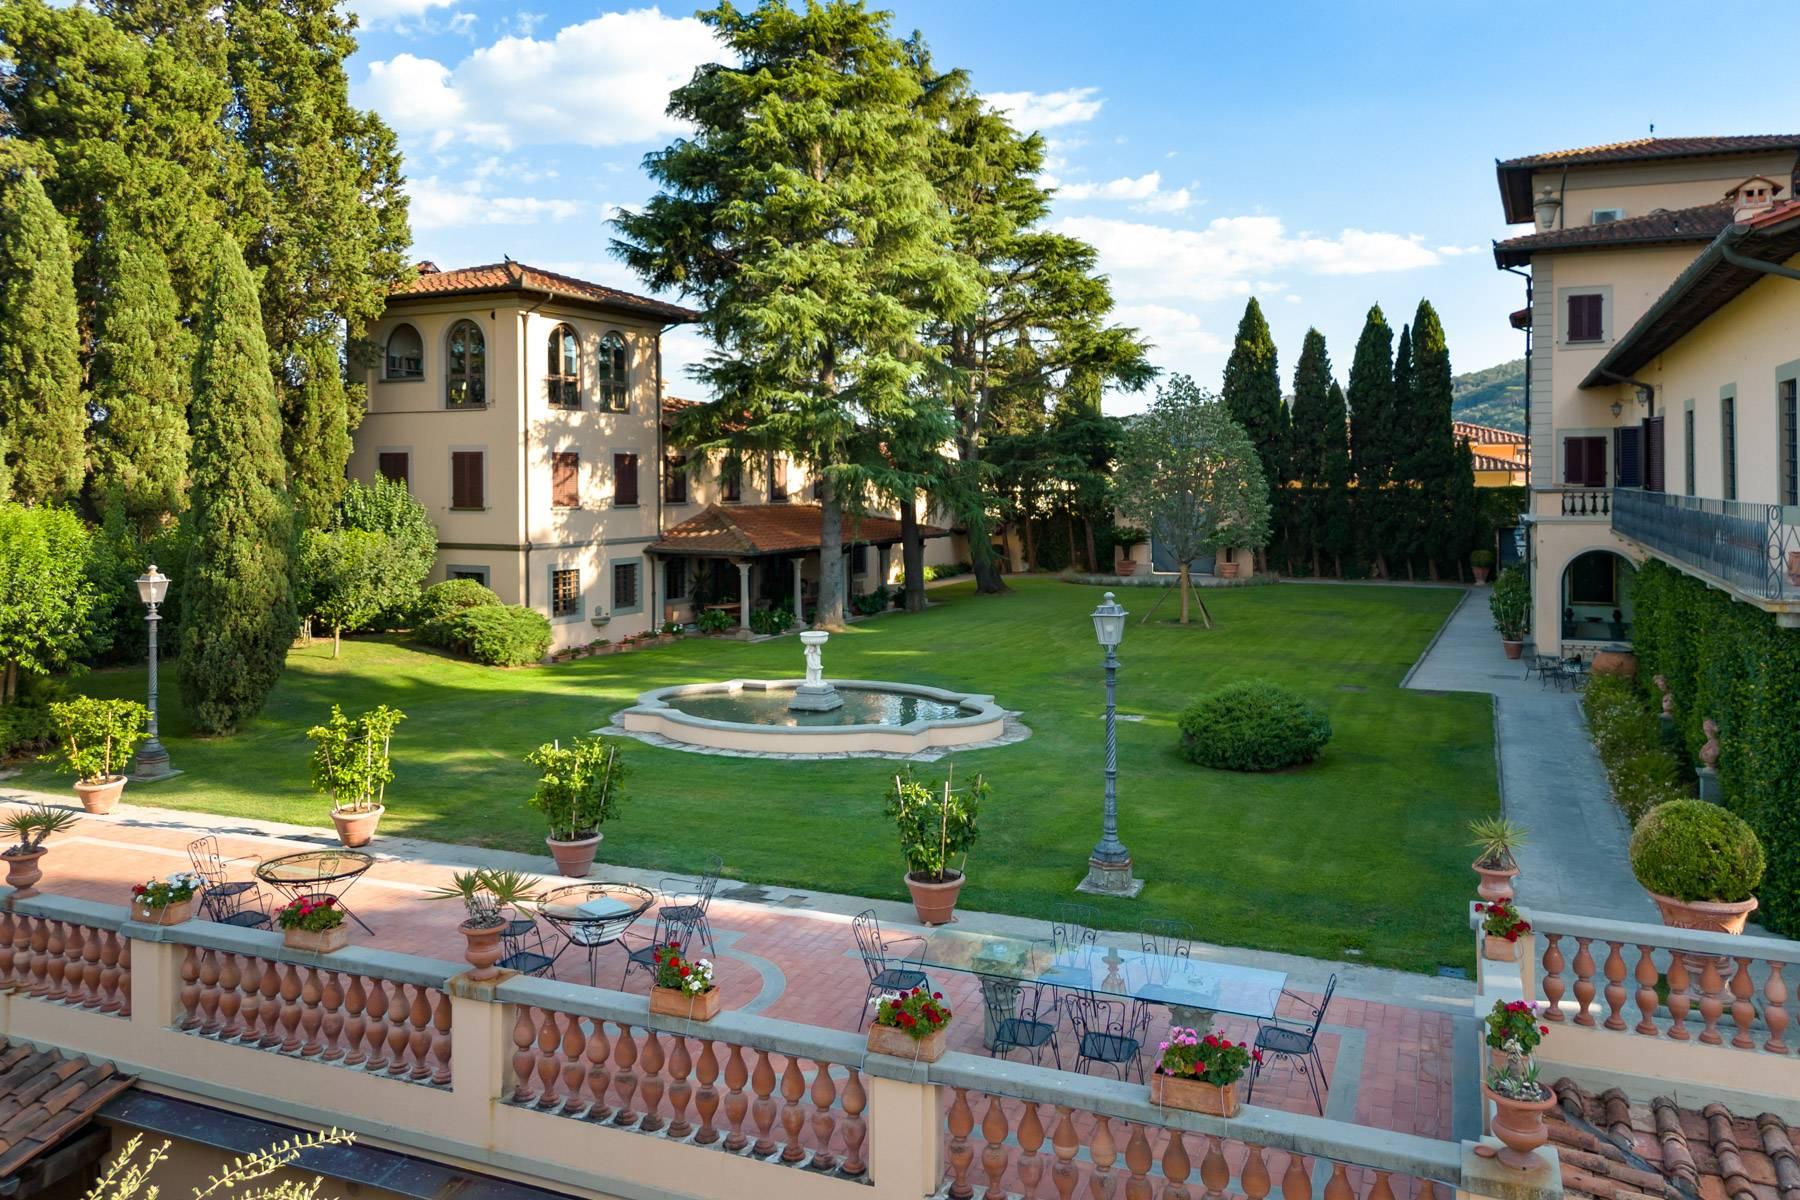 Apartment in a historical villa on the hills of Carmignano - 7